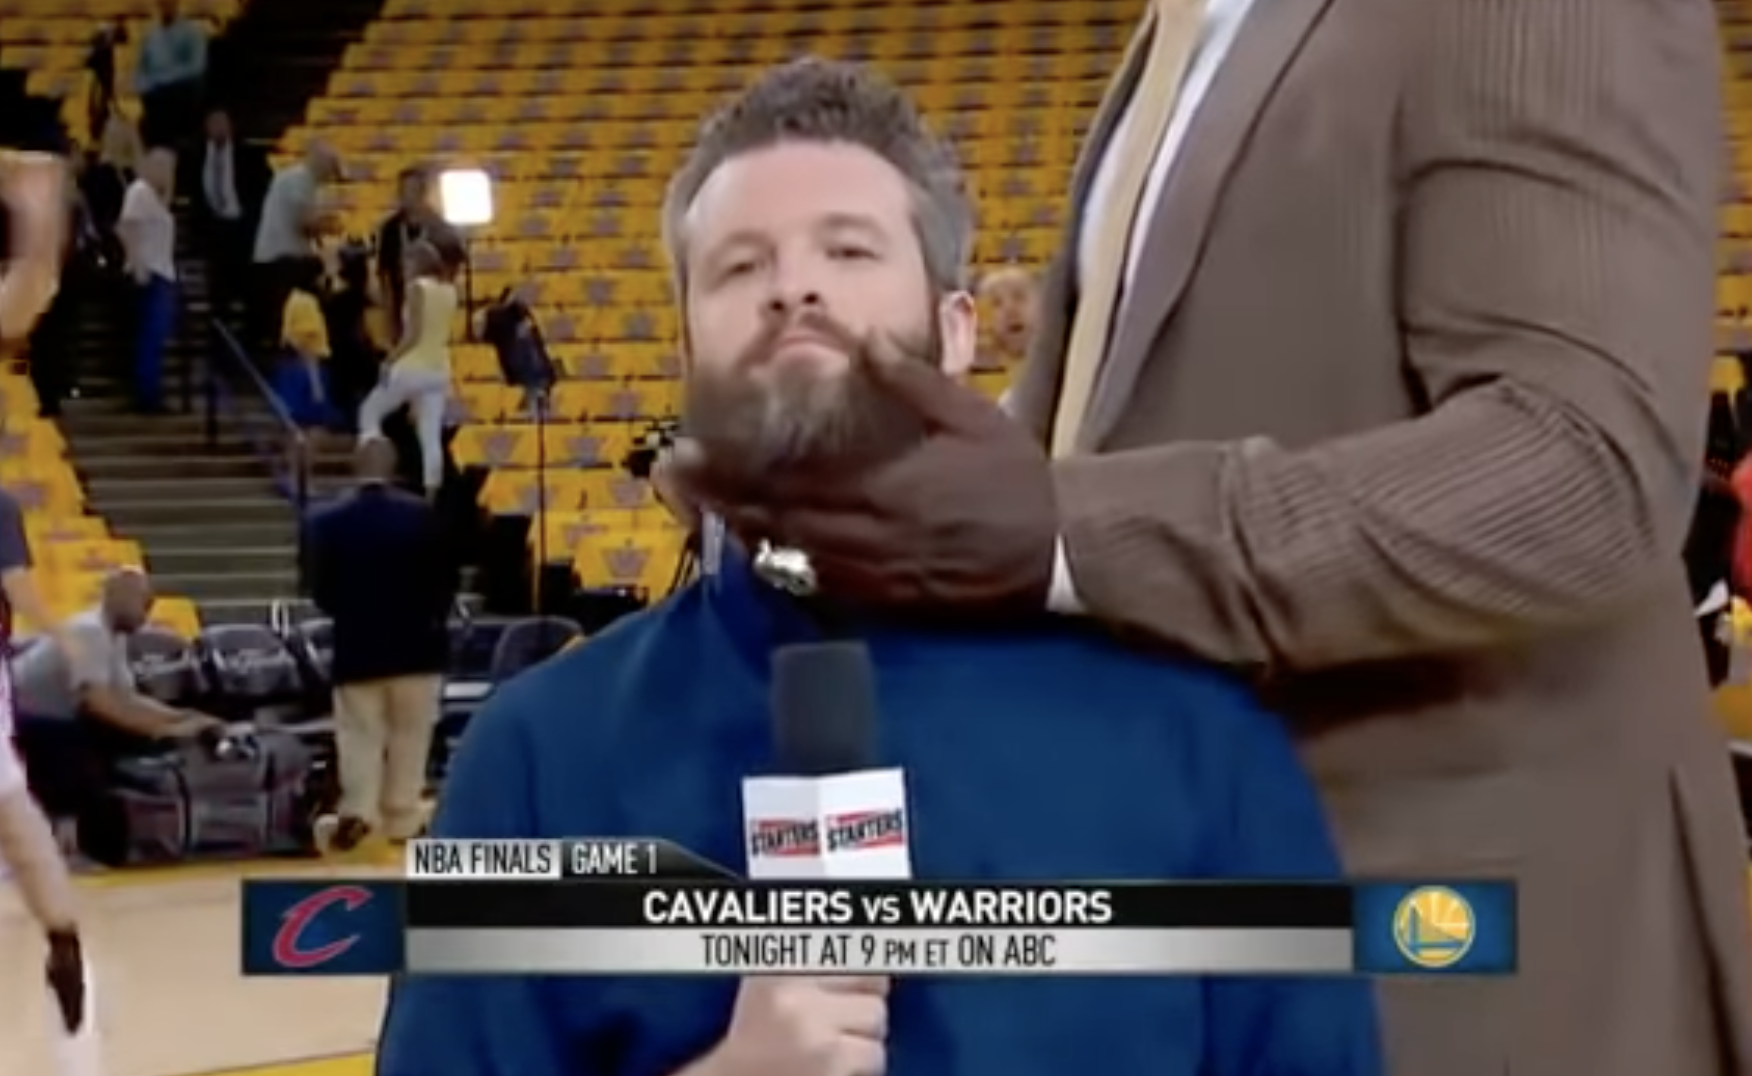 A reporter getting his beard caressed